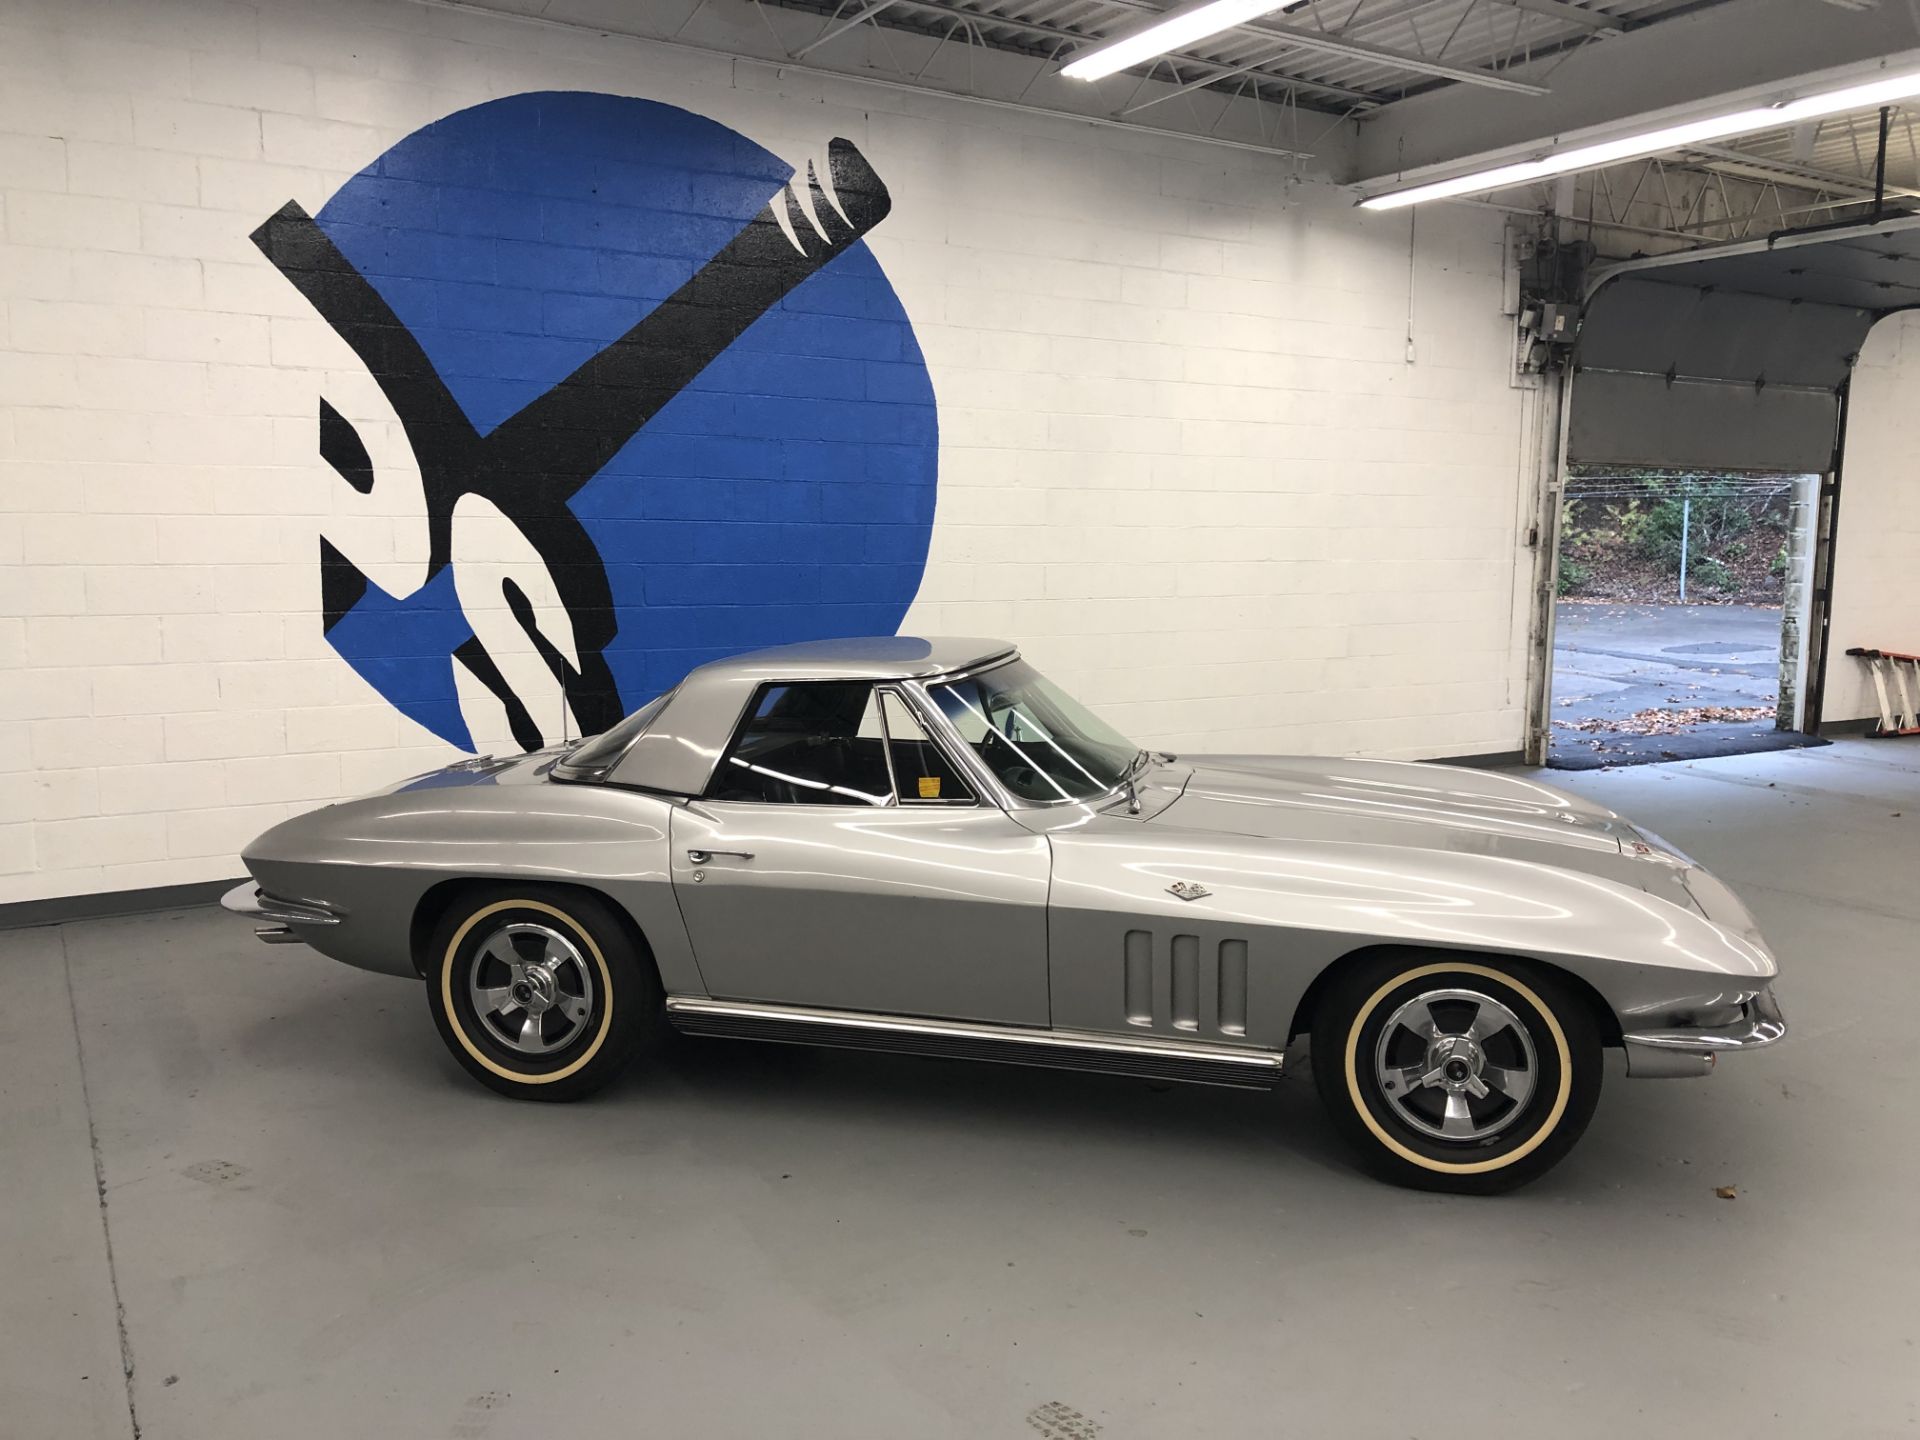 1966 Chevrolet Corvette Convertible Numbers Matching, 327 Cubic Inch, 300 HP, V8 Original Muncie 4 S - Image 14 of 15